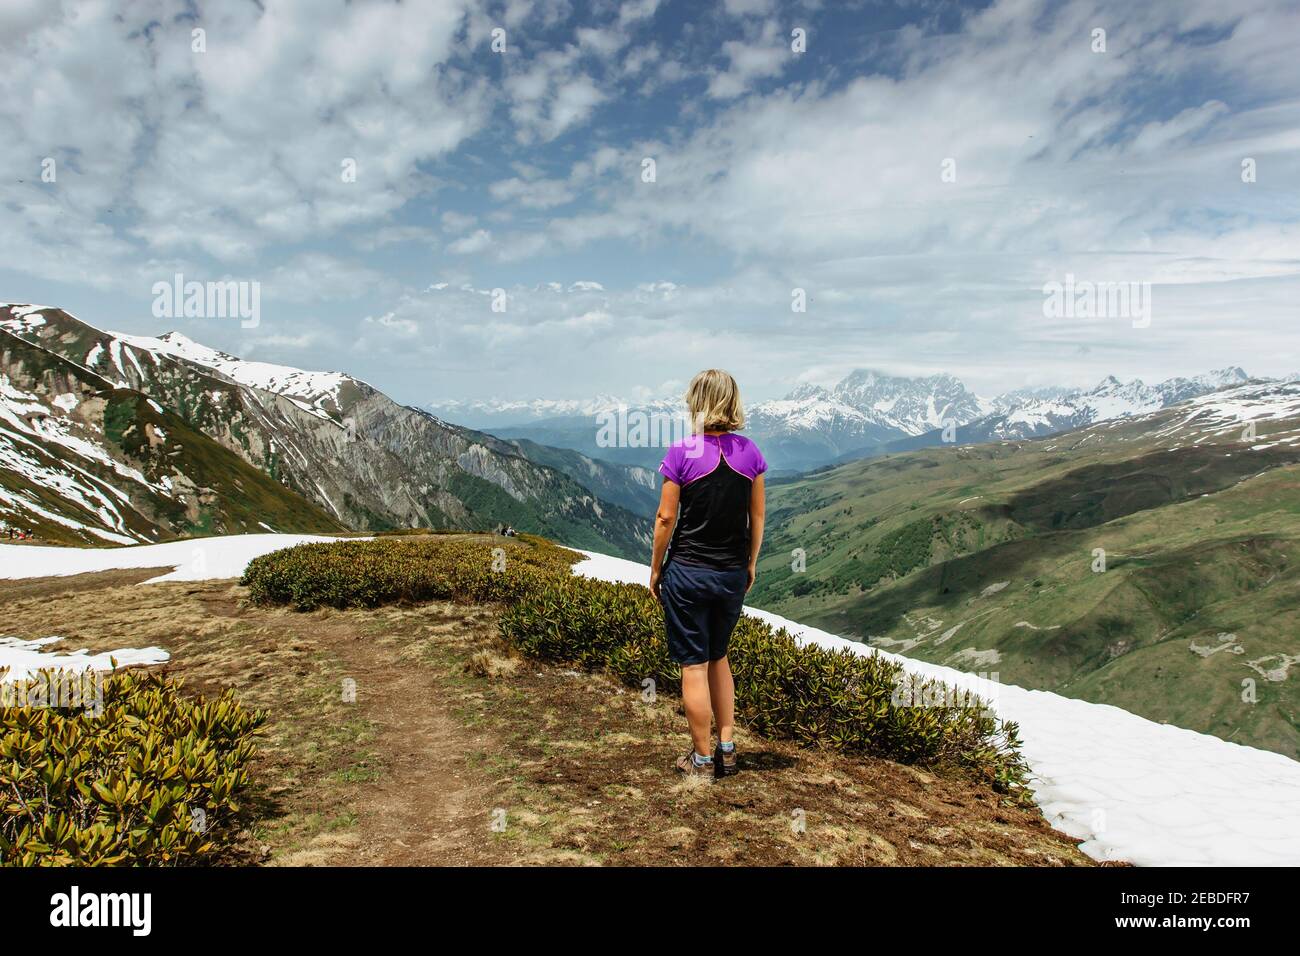 Girl standin on the top of a mountain,Georgia, snowy peaks in background.Backpacker enjoying view of mountain panorama.Wanderlust travel scene.Sporty Stock Photo